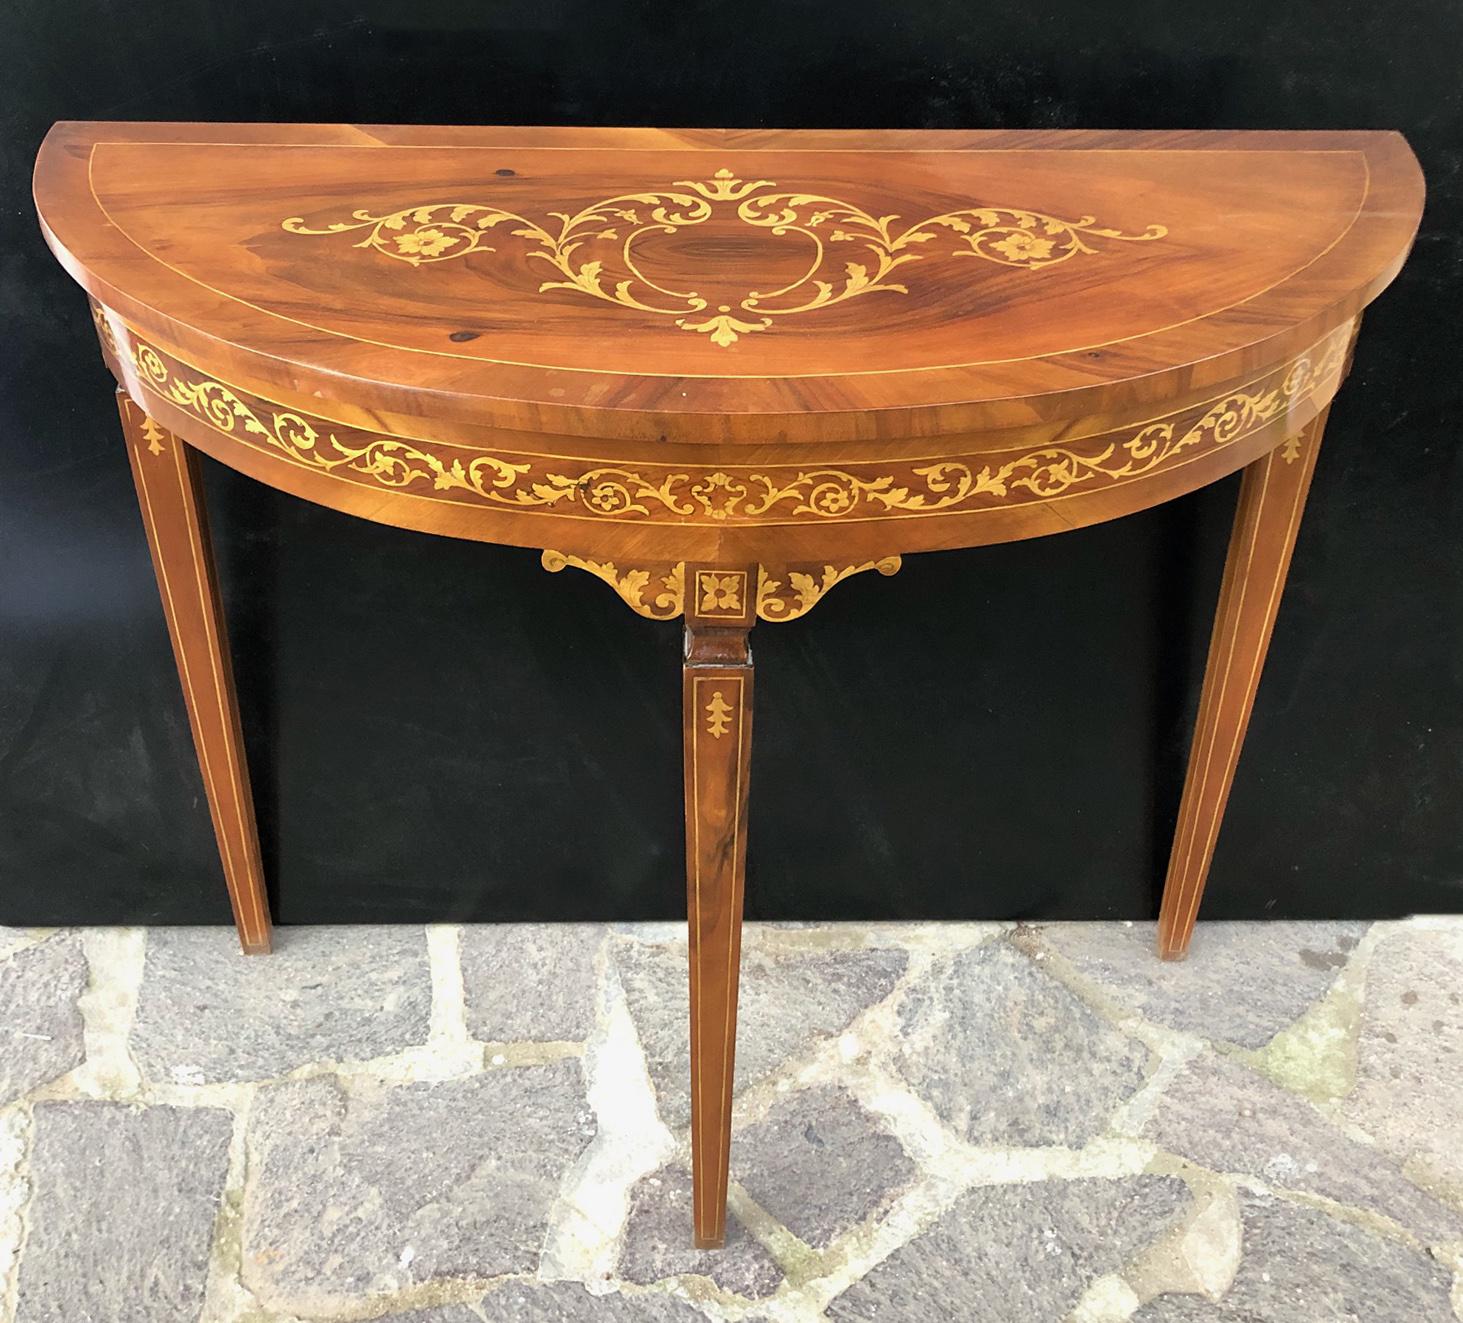 Italian half moon console table from 1940 with fruit and walnut wood inlays. 
The support is in spruce and poplar.
 The article is an example built in 1940 on the style of a piece of furniture from the 1800s.
 It has no obvious defects.The paint